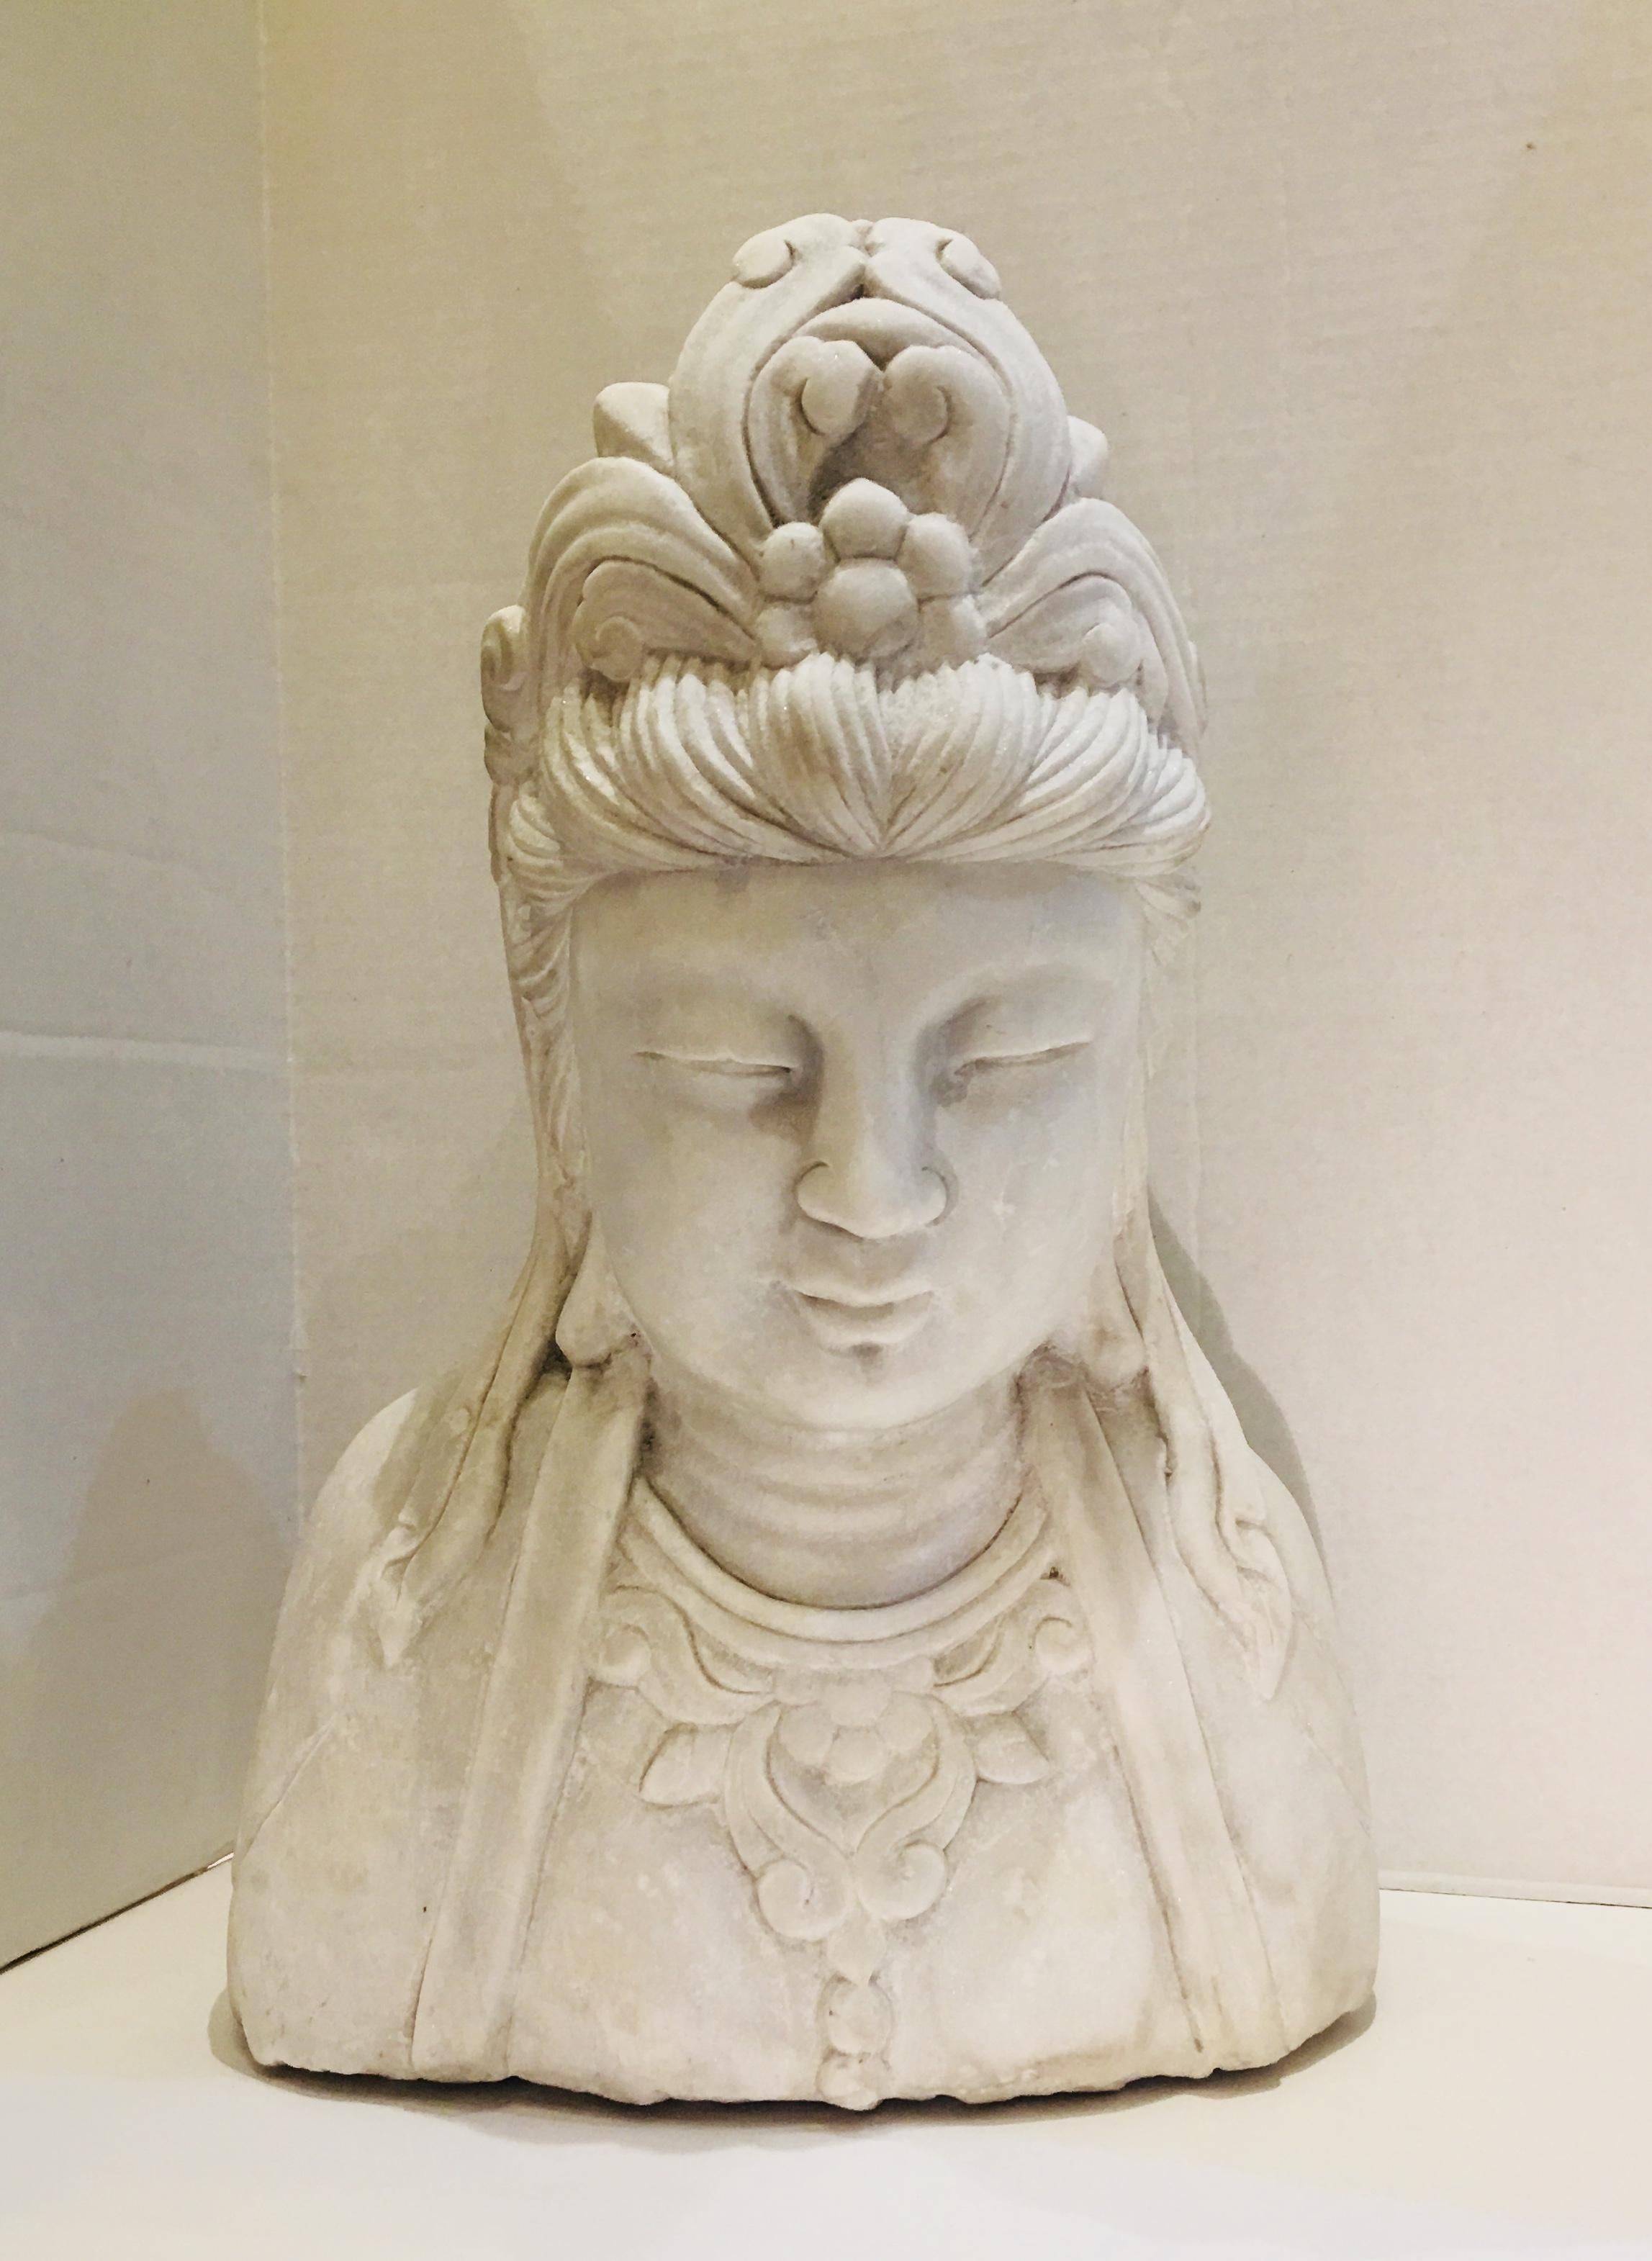 The beloved Buddhist divinity goddess Guanyin (Kuan Yin, Guan Yin) is beautifully depicted in this hand carved, life-sized, Carrara marble bust. Carved from a solid block of stone, this bust is the epitome of zen tranquility, perfect for a modern or